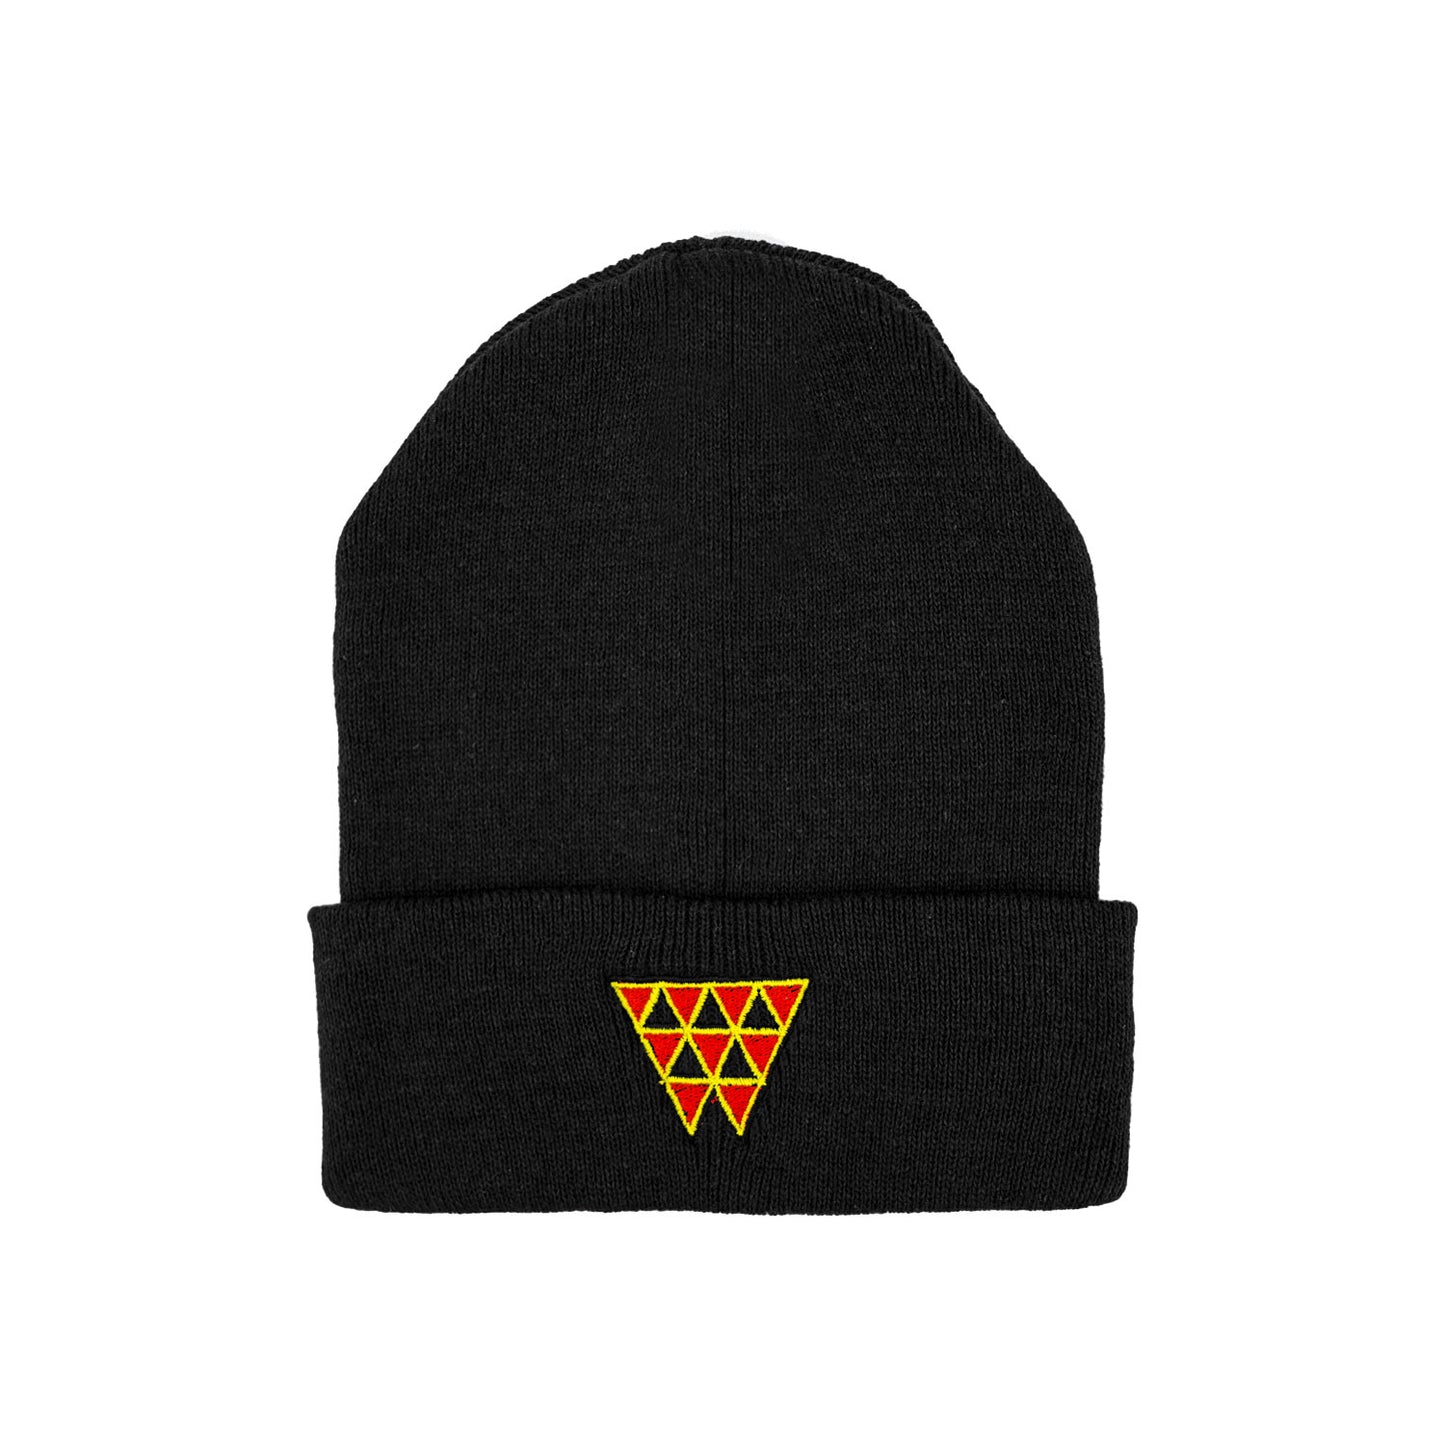 Red Triangle Knitted Cuff Beanie - Black